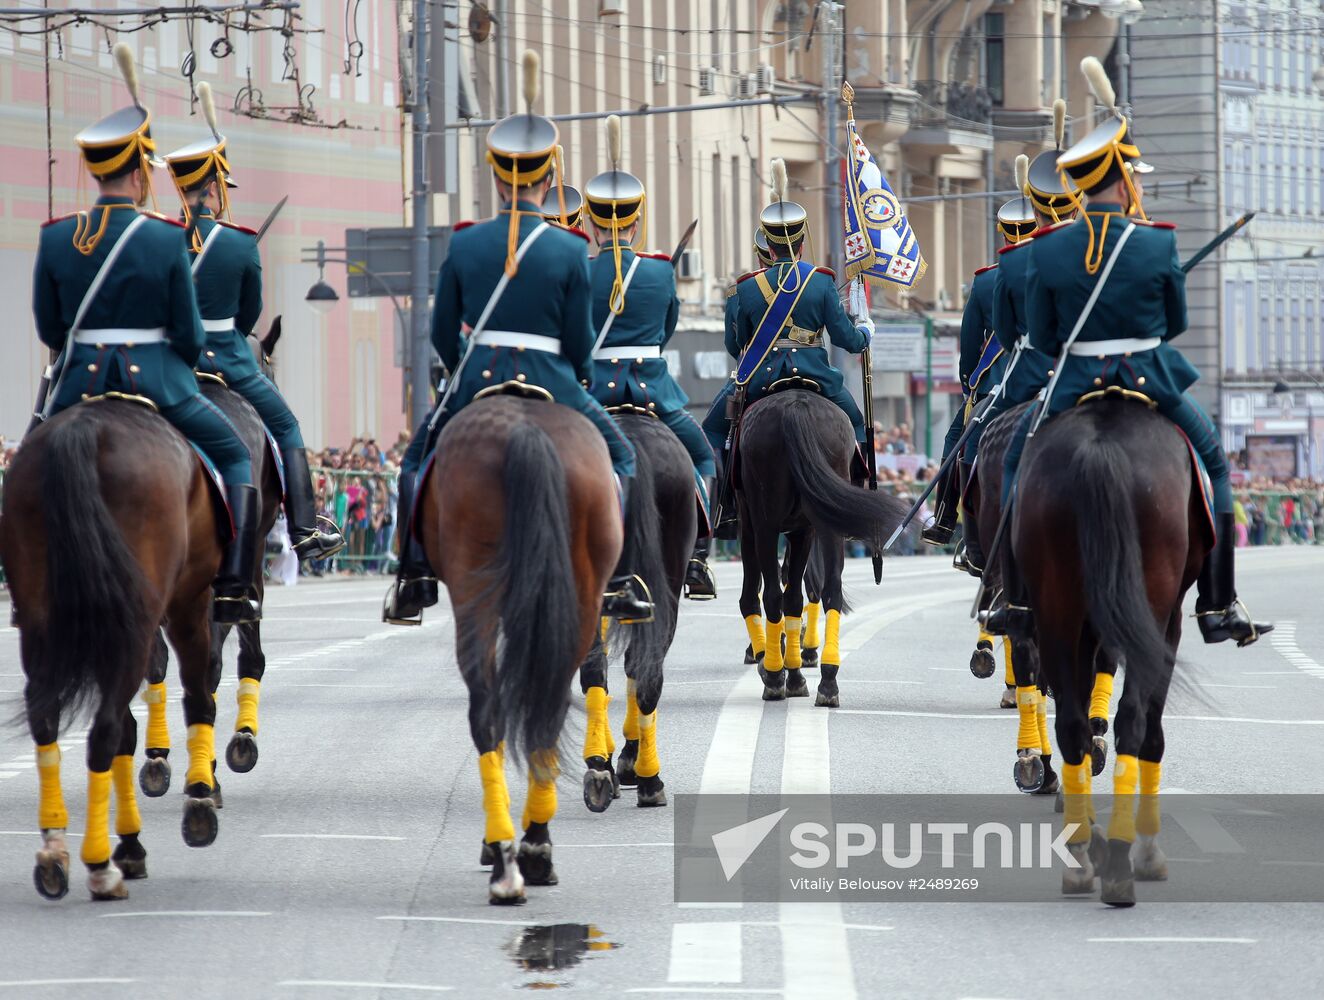 Parade of military music bands during Spasskaya Tower festival